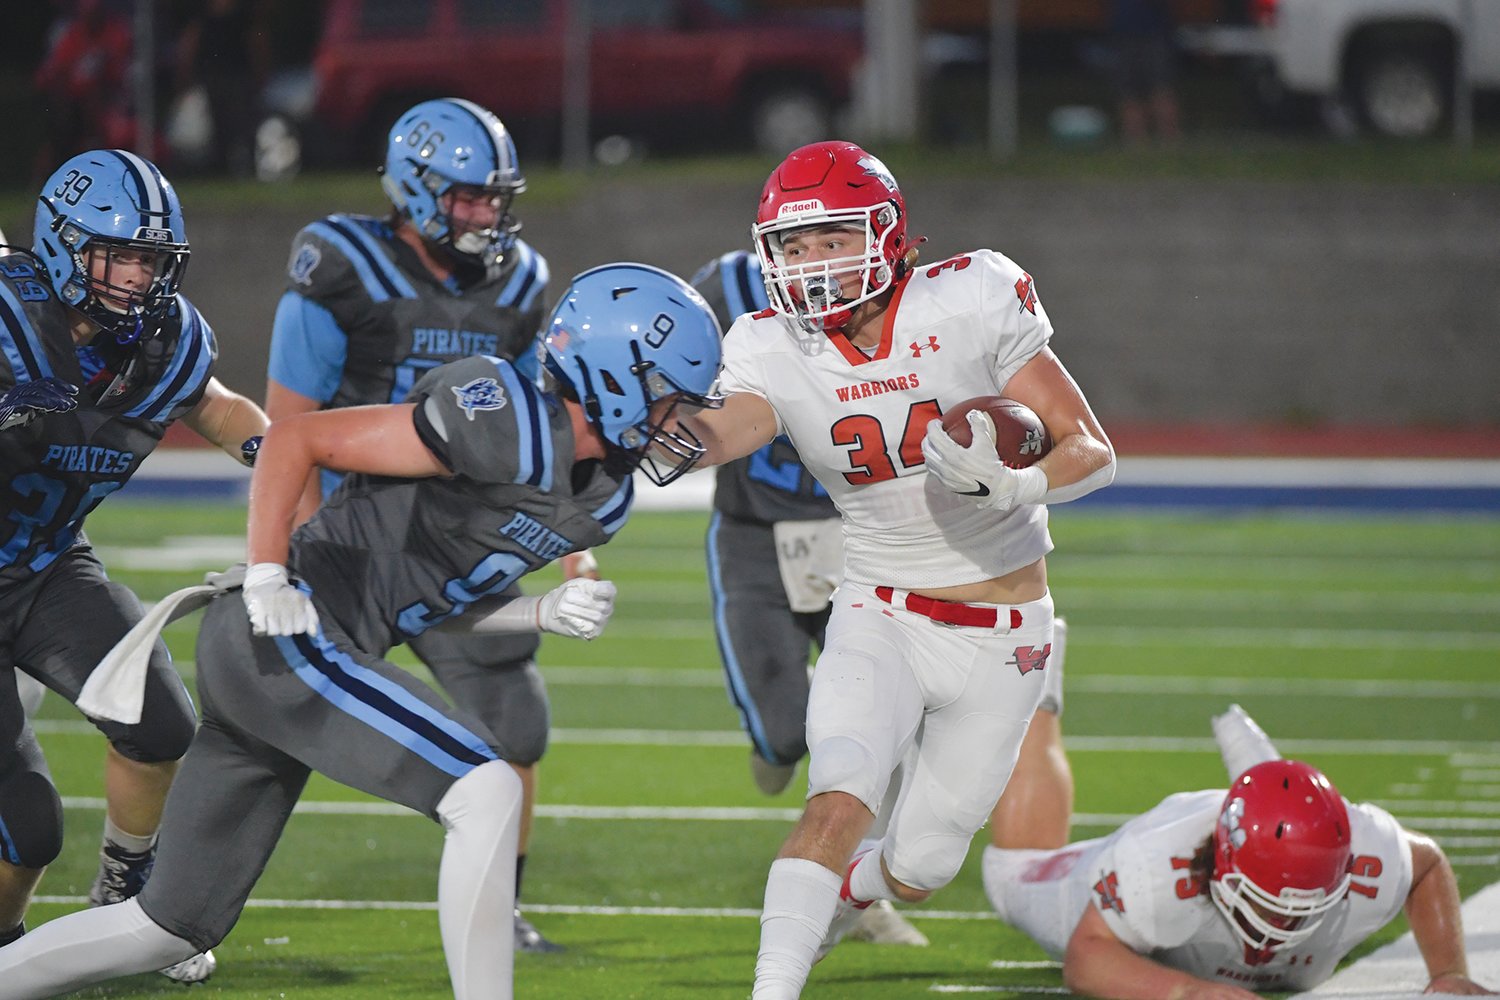 MOVING THE CHAINS — Warrenton running back Joe Goldsmith (34)  gains some yardage in Friday’s road game at St. Charles. Goldsmith rushed for a team-best 97 yards on 13 carries in the Warriors’ 42-8 victory.